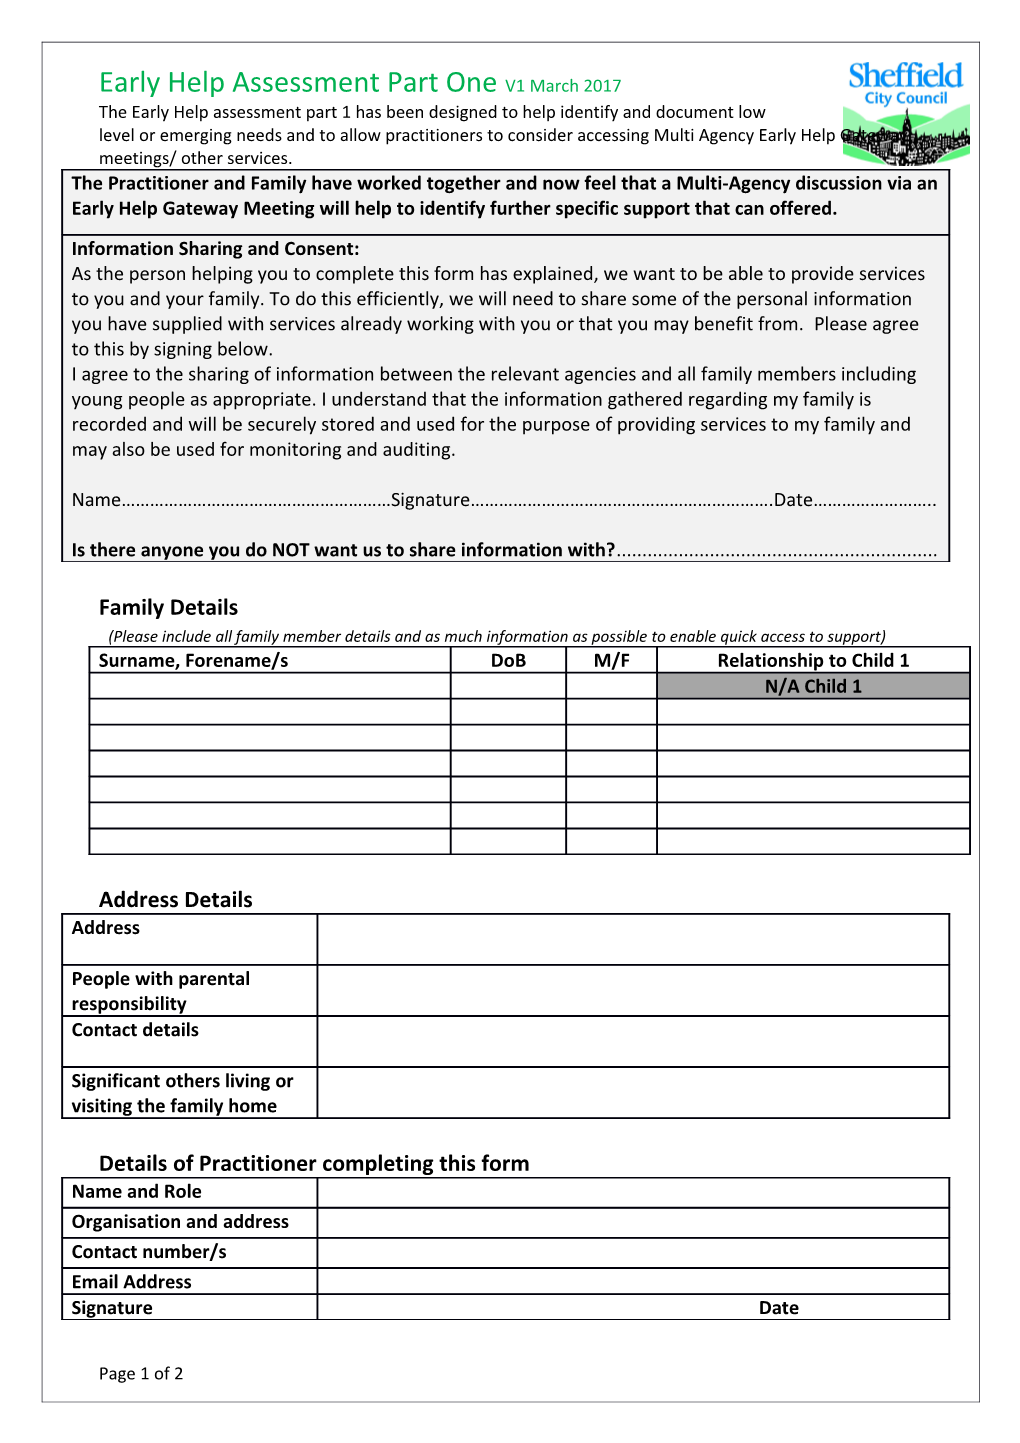 The Early Help Assessment Part 1 Has Been Designed to Help Identify and Document Low